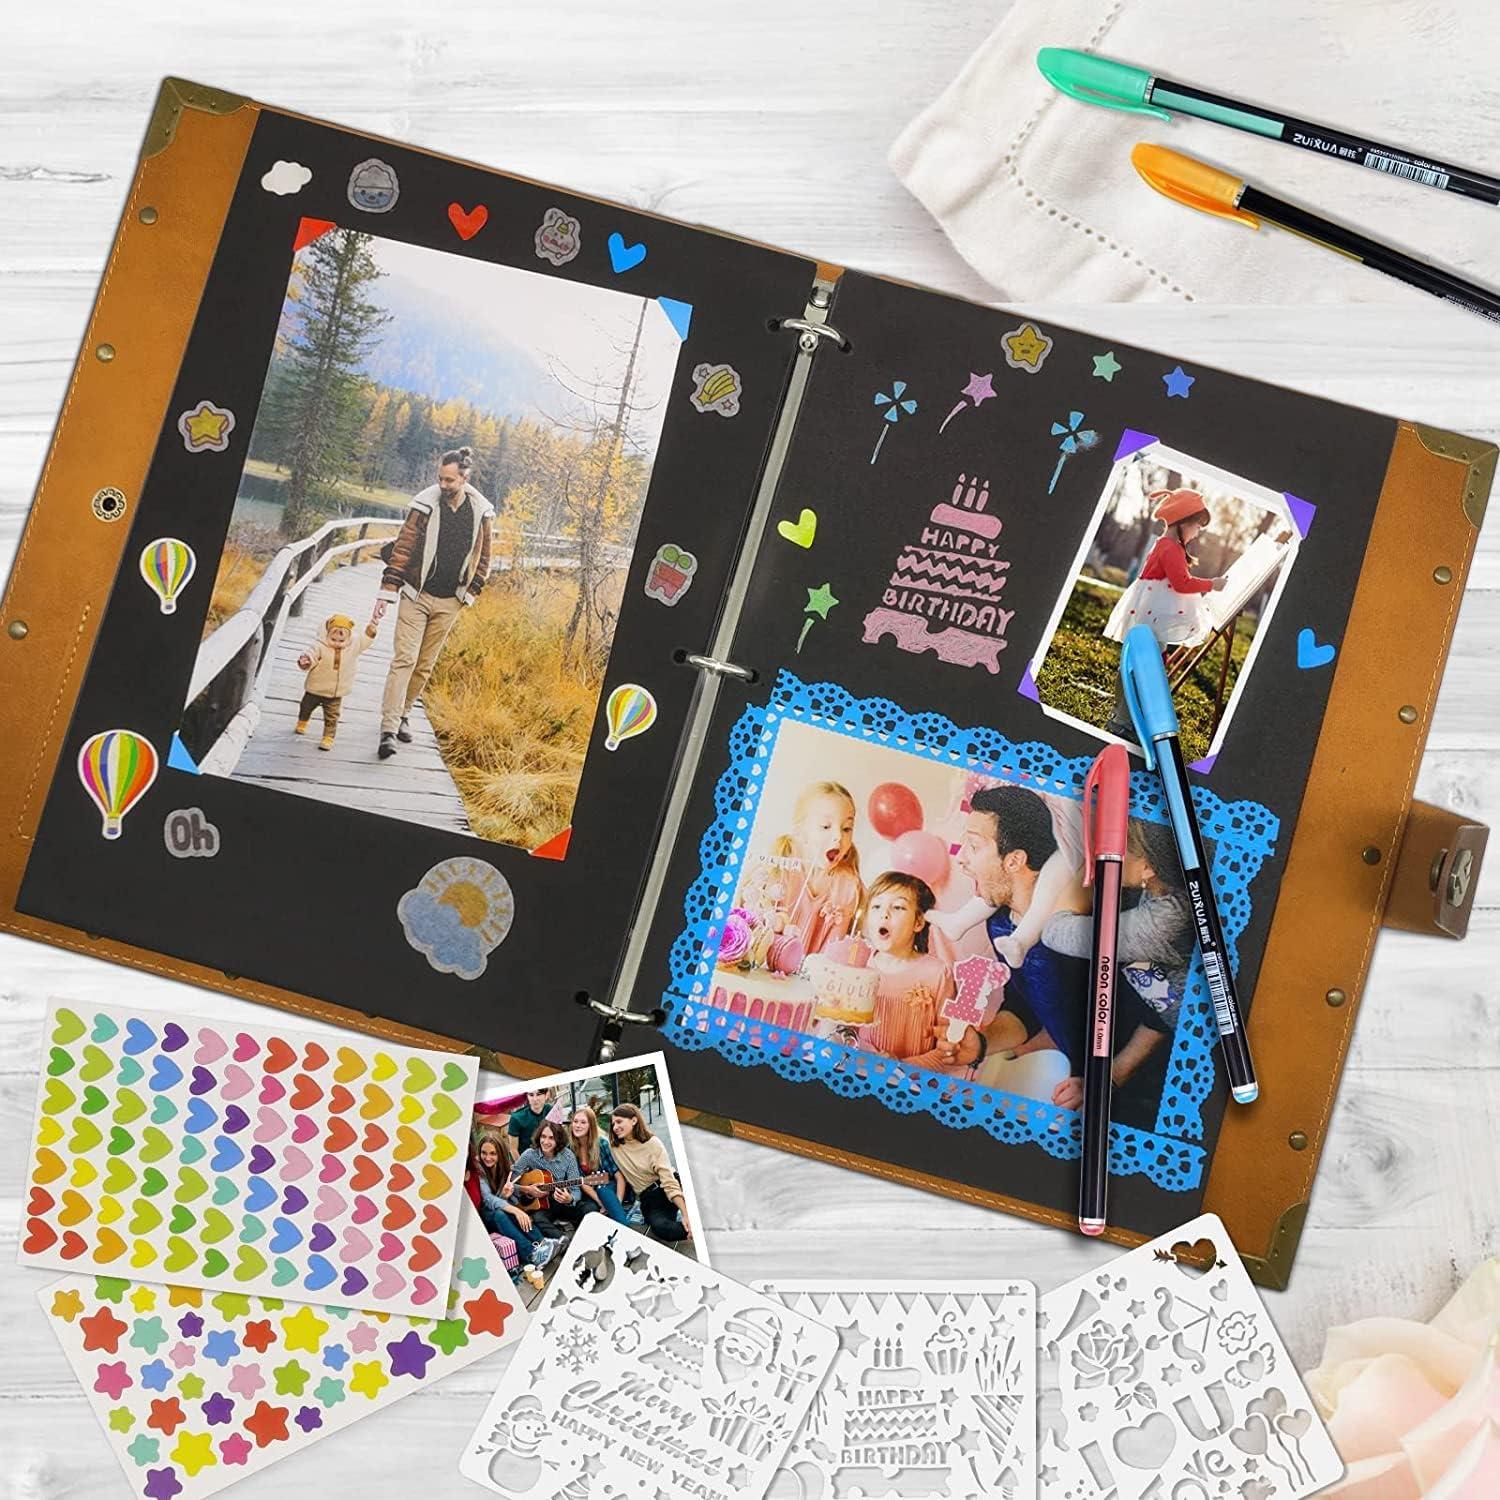 Personalized Scrapbook Album With Black Pages, Wedding Scrapbook Album With  Photo Prints, Blank Scrapbook Album With Retro Prints 